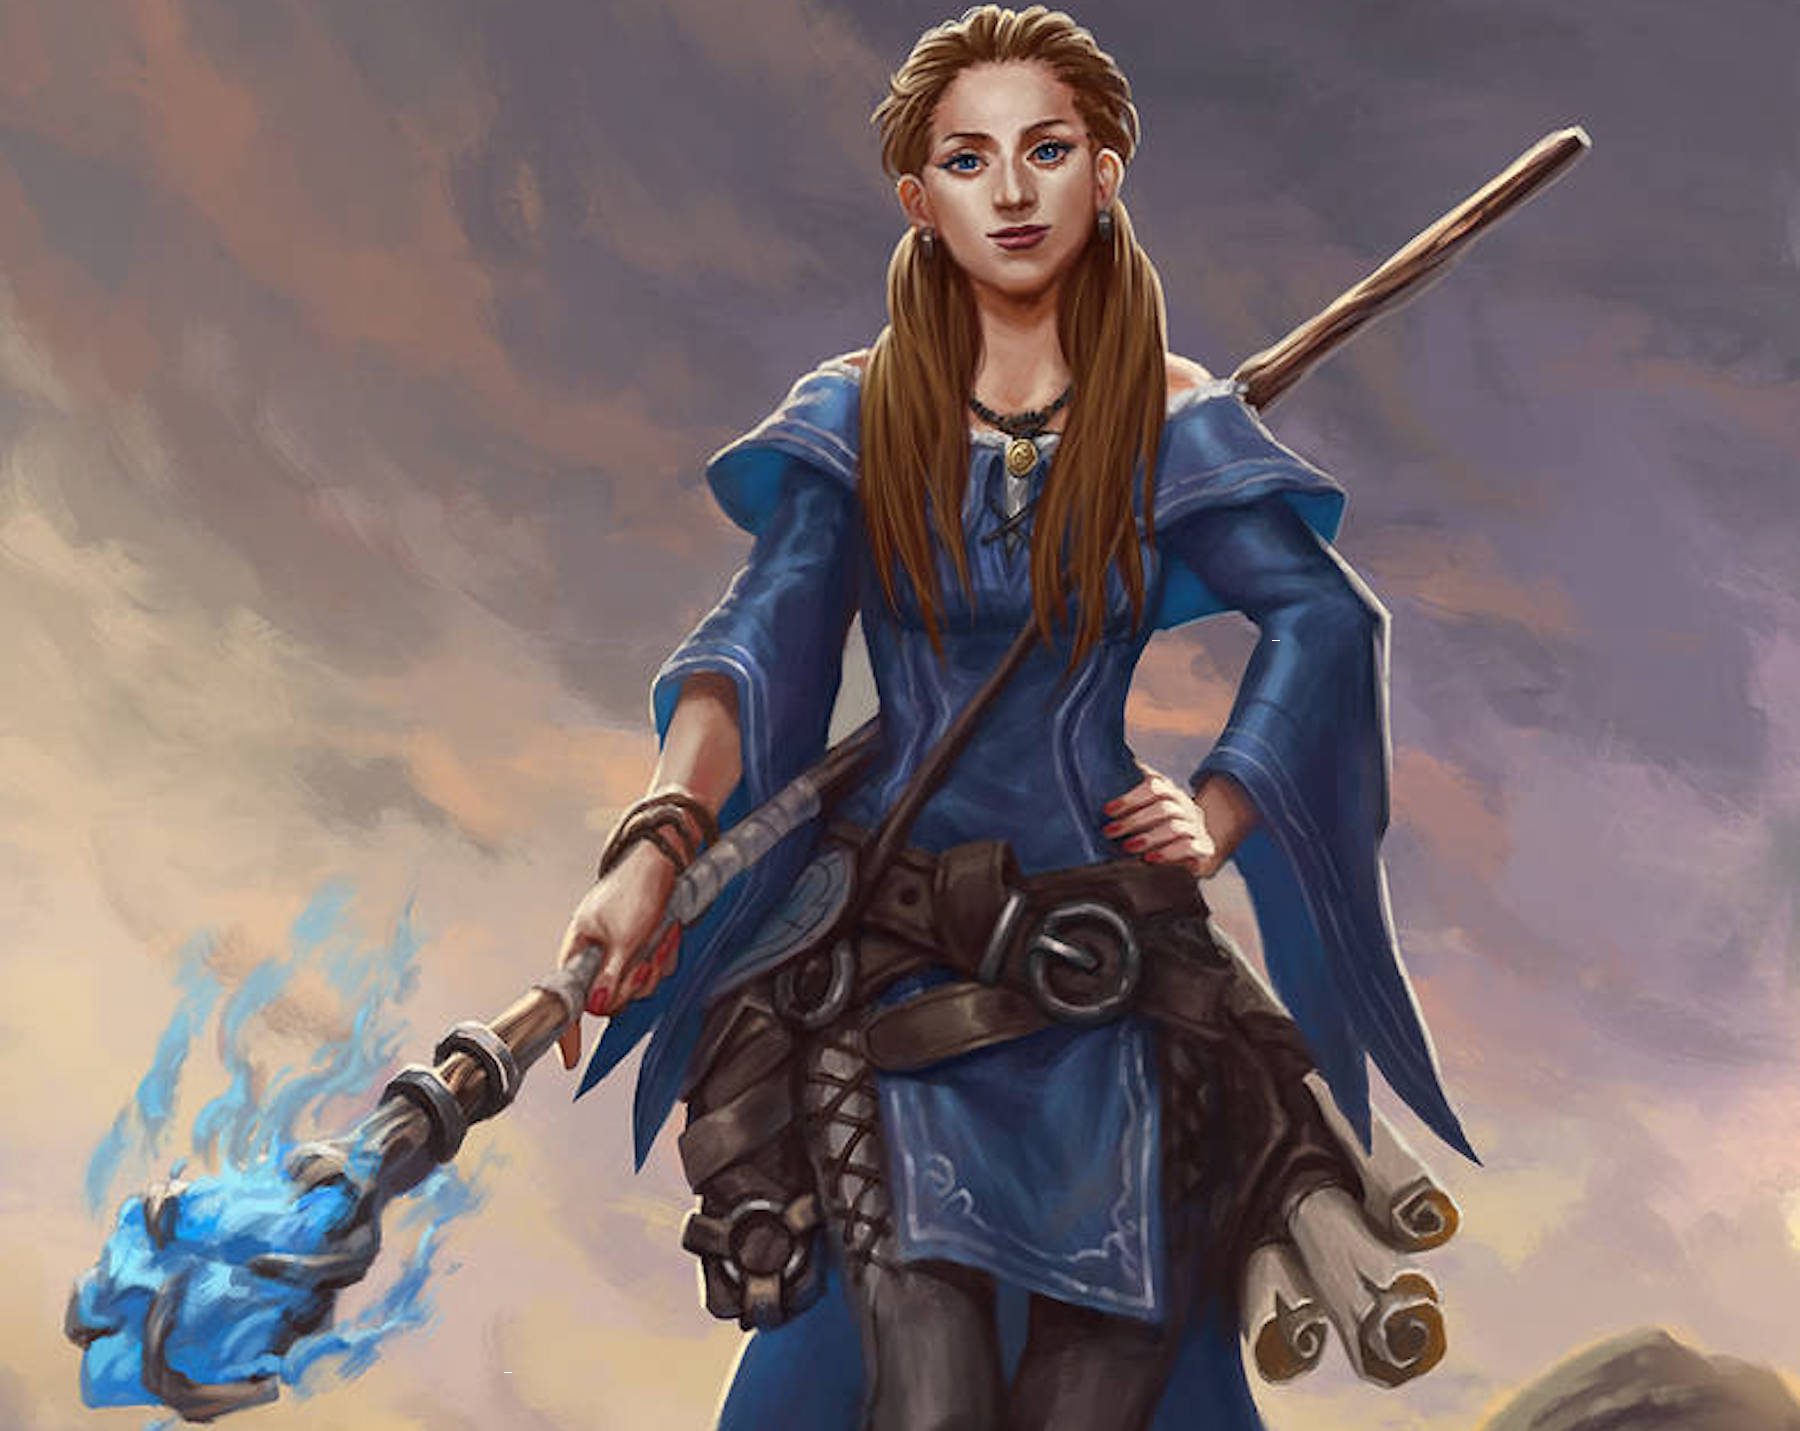 A cryomancer wizard monk, female with long brown hair, blue tunic, wielding a staff.